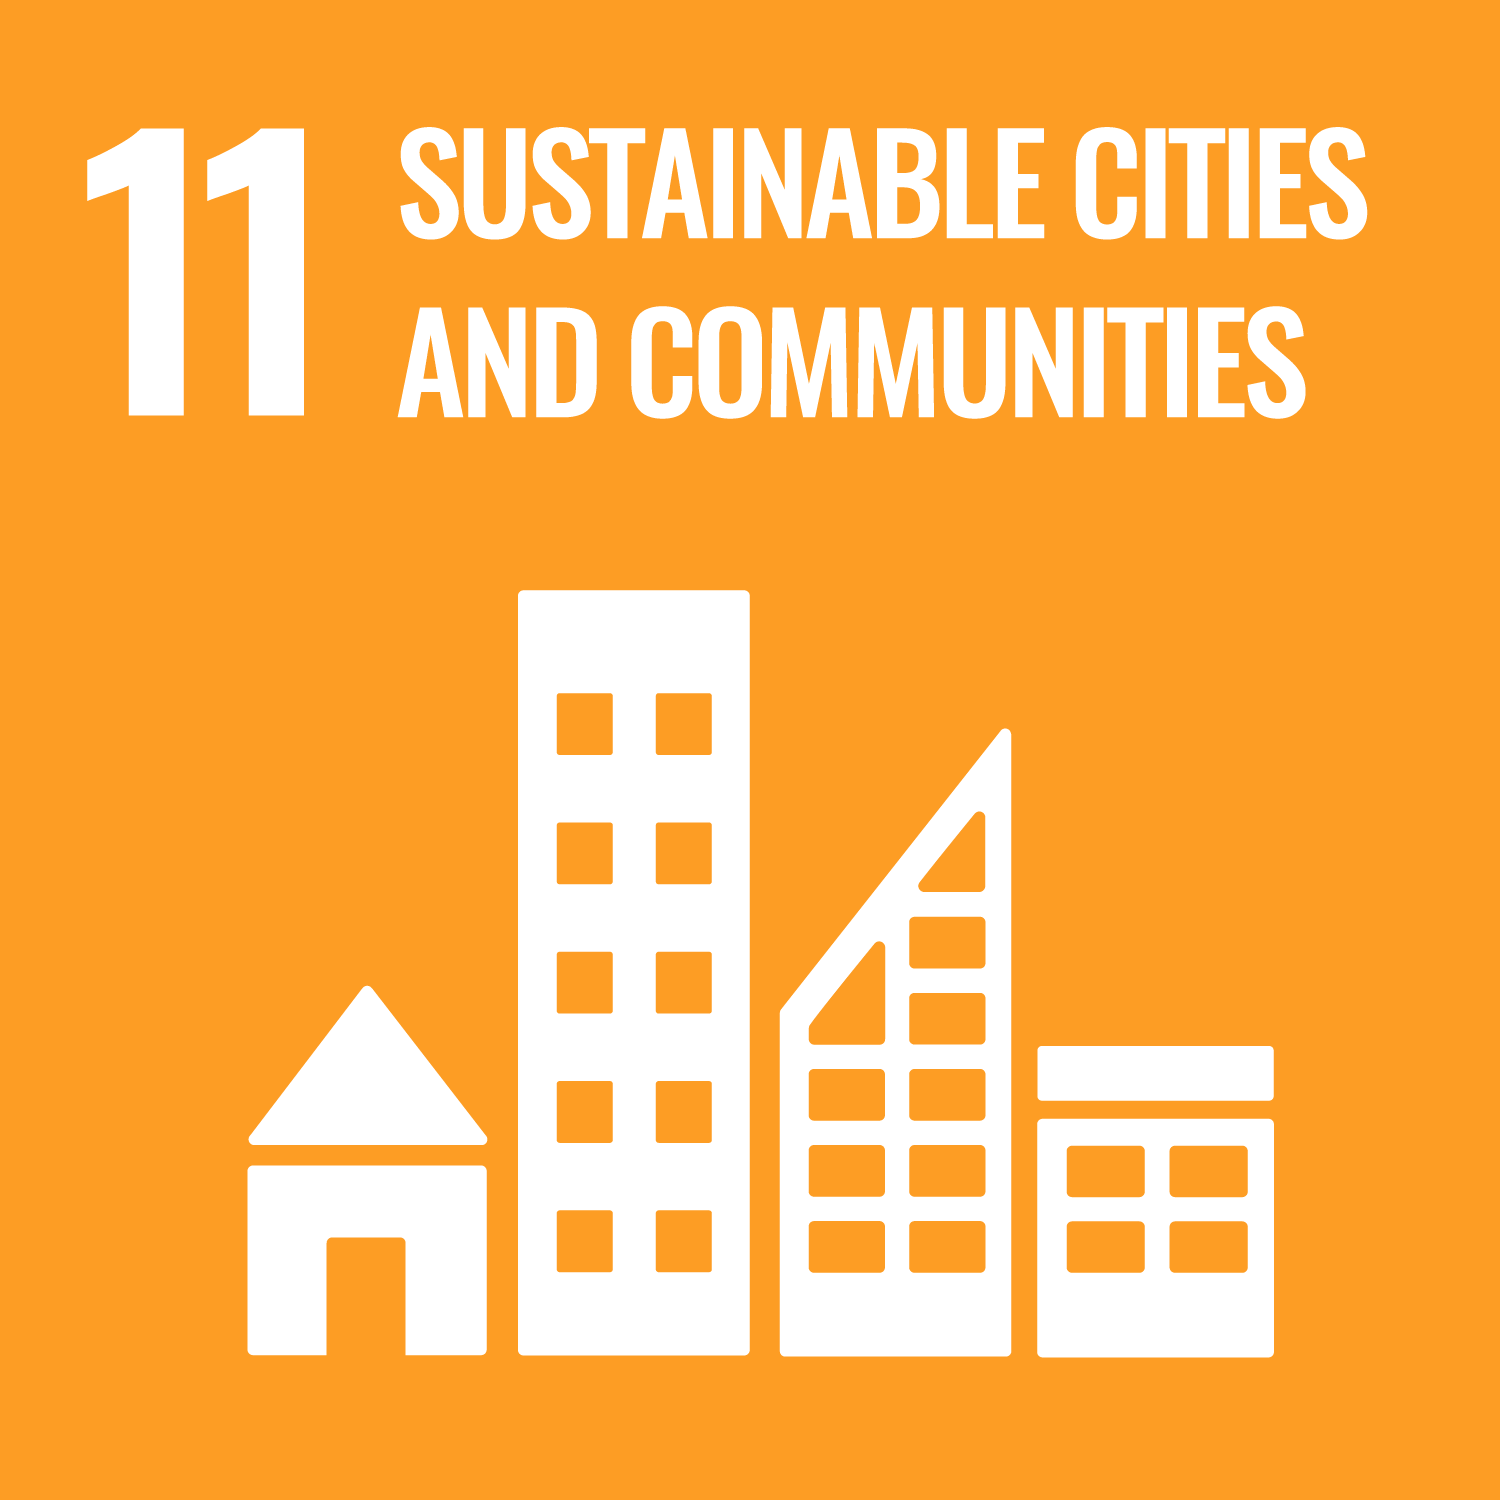 11 Make Cities And Human Settlements Inclusive Safe Resilient And Sustainable